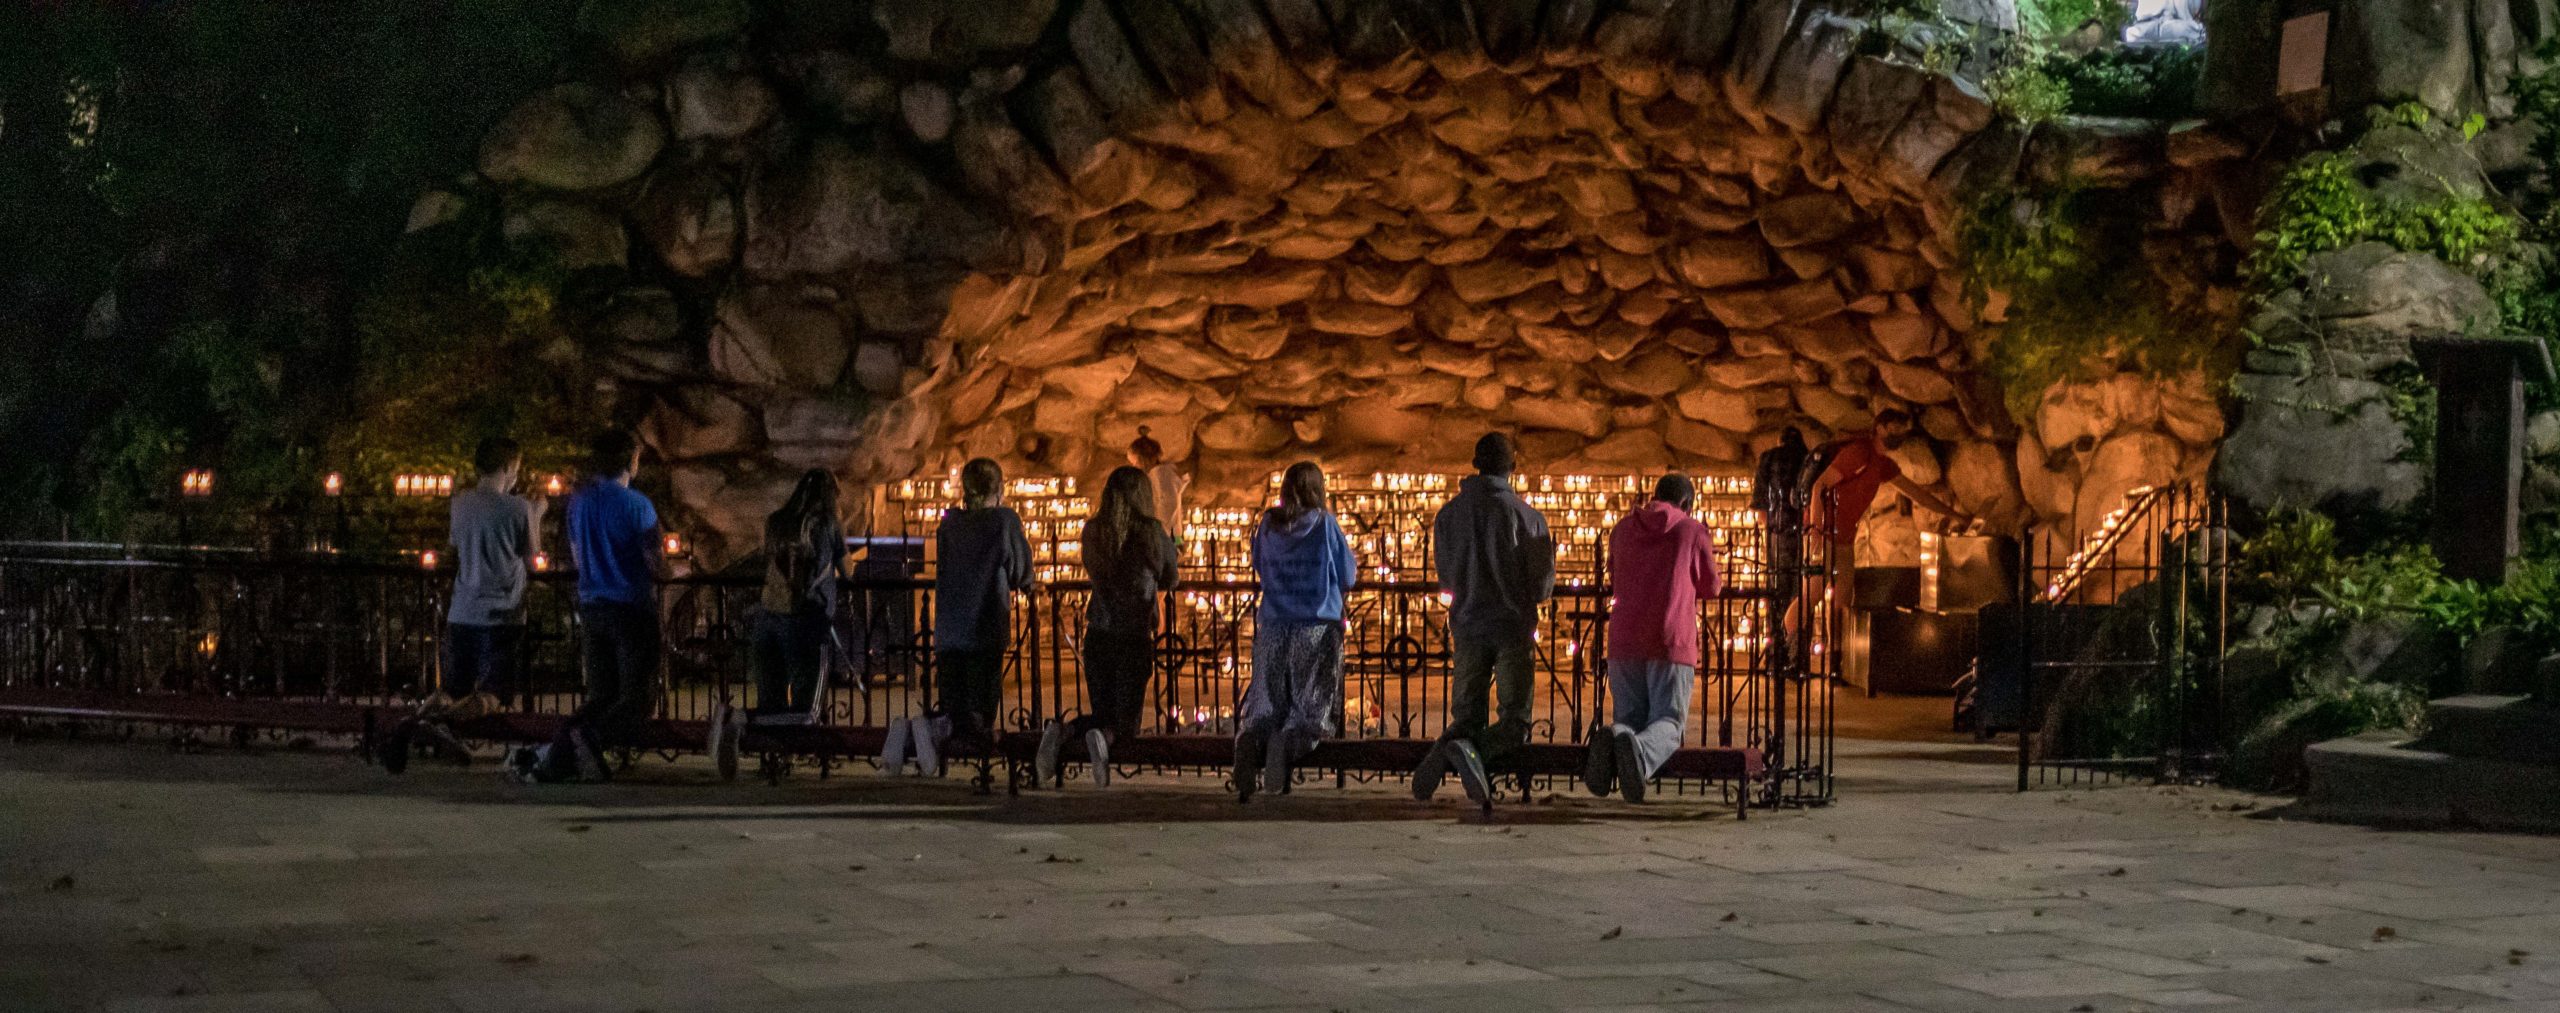 Students praying at the Grotto at the University of Notre Dame